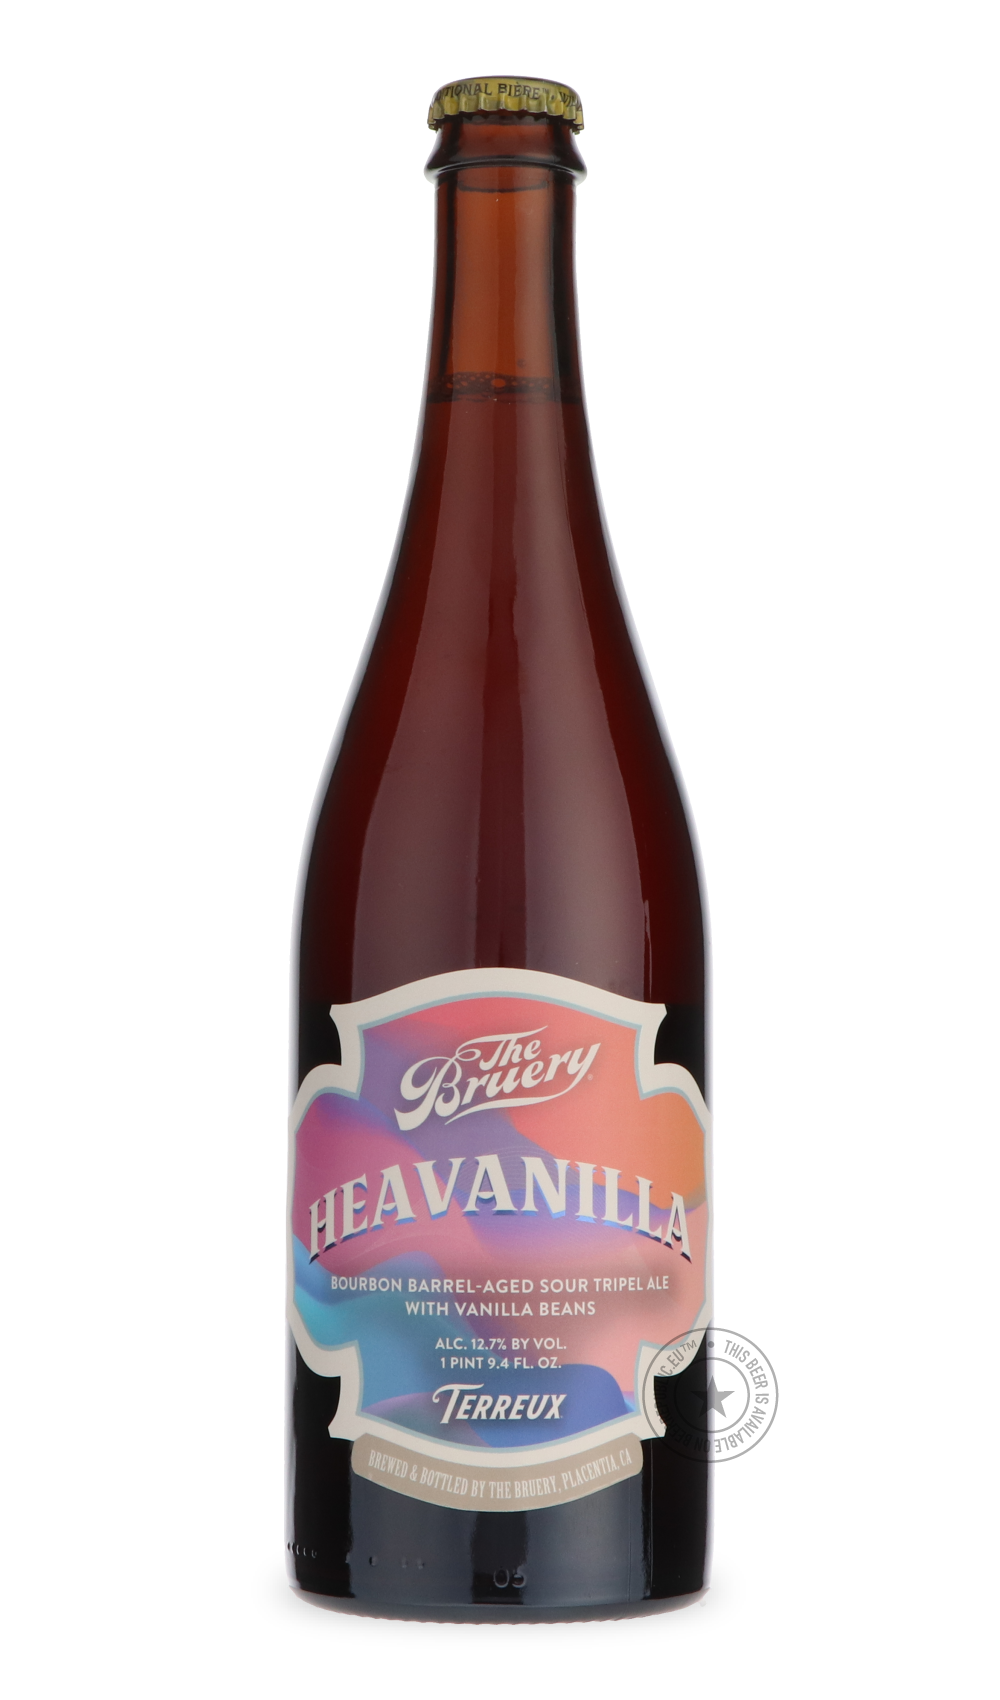 -The Bruery- Heavanilla-Sour / Wild & Fruity- Only @ Beer Republic - The best online beer store for American & Canadian craft beer - Buy beer online from the USA and Canada - Bier online kopen - Amerikaans bier kopen - Craft beer store - Craft beer kopen - Amerikanisch bier kaufen - Bier online kaufen - Acheter biere online - IPA - Stout - Porter - New England IPA - Hazy IPA - Imperial Stout - Barrel Aged - Barrel Aged Imperial Stout - Brown - Dark beer - Blond - Blonde - Pilsner - Lager - Wheat - Weizen - 